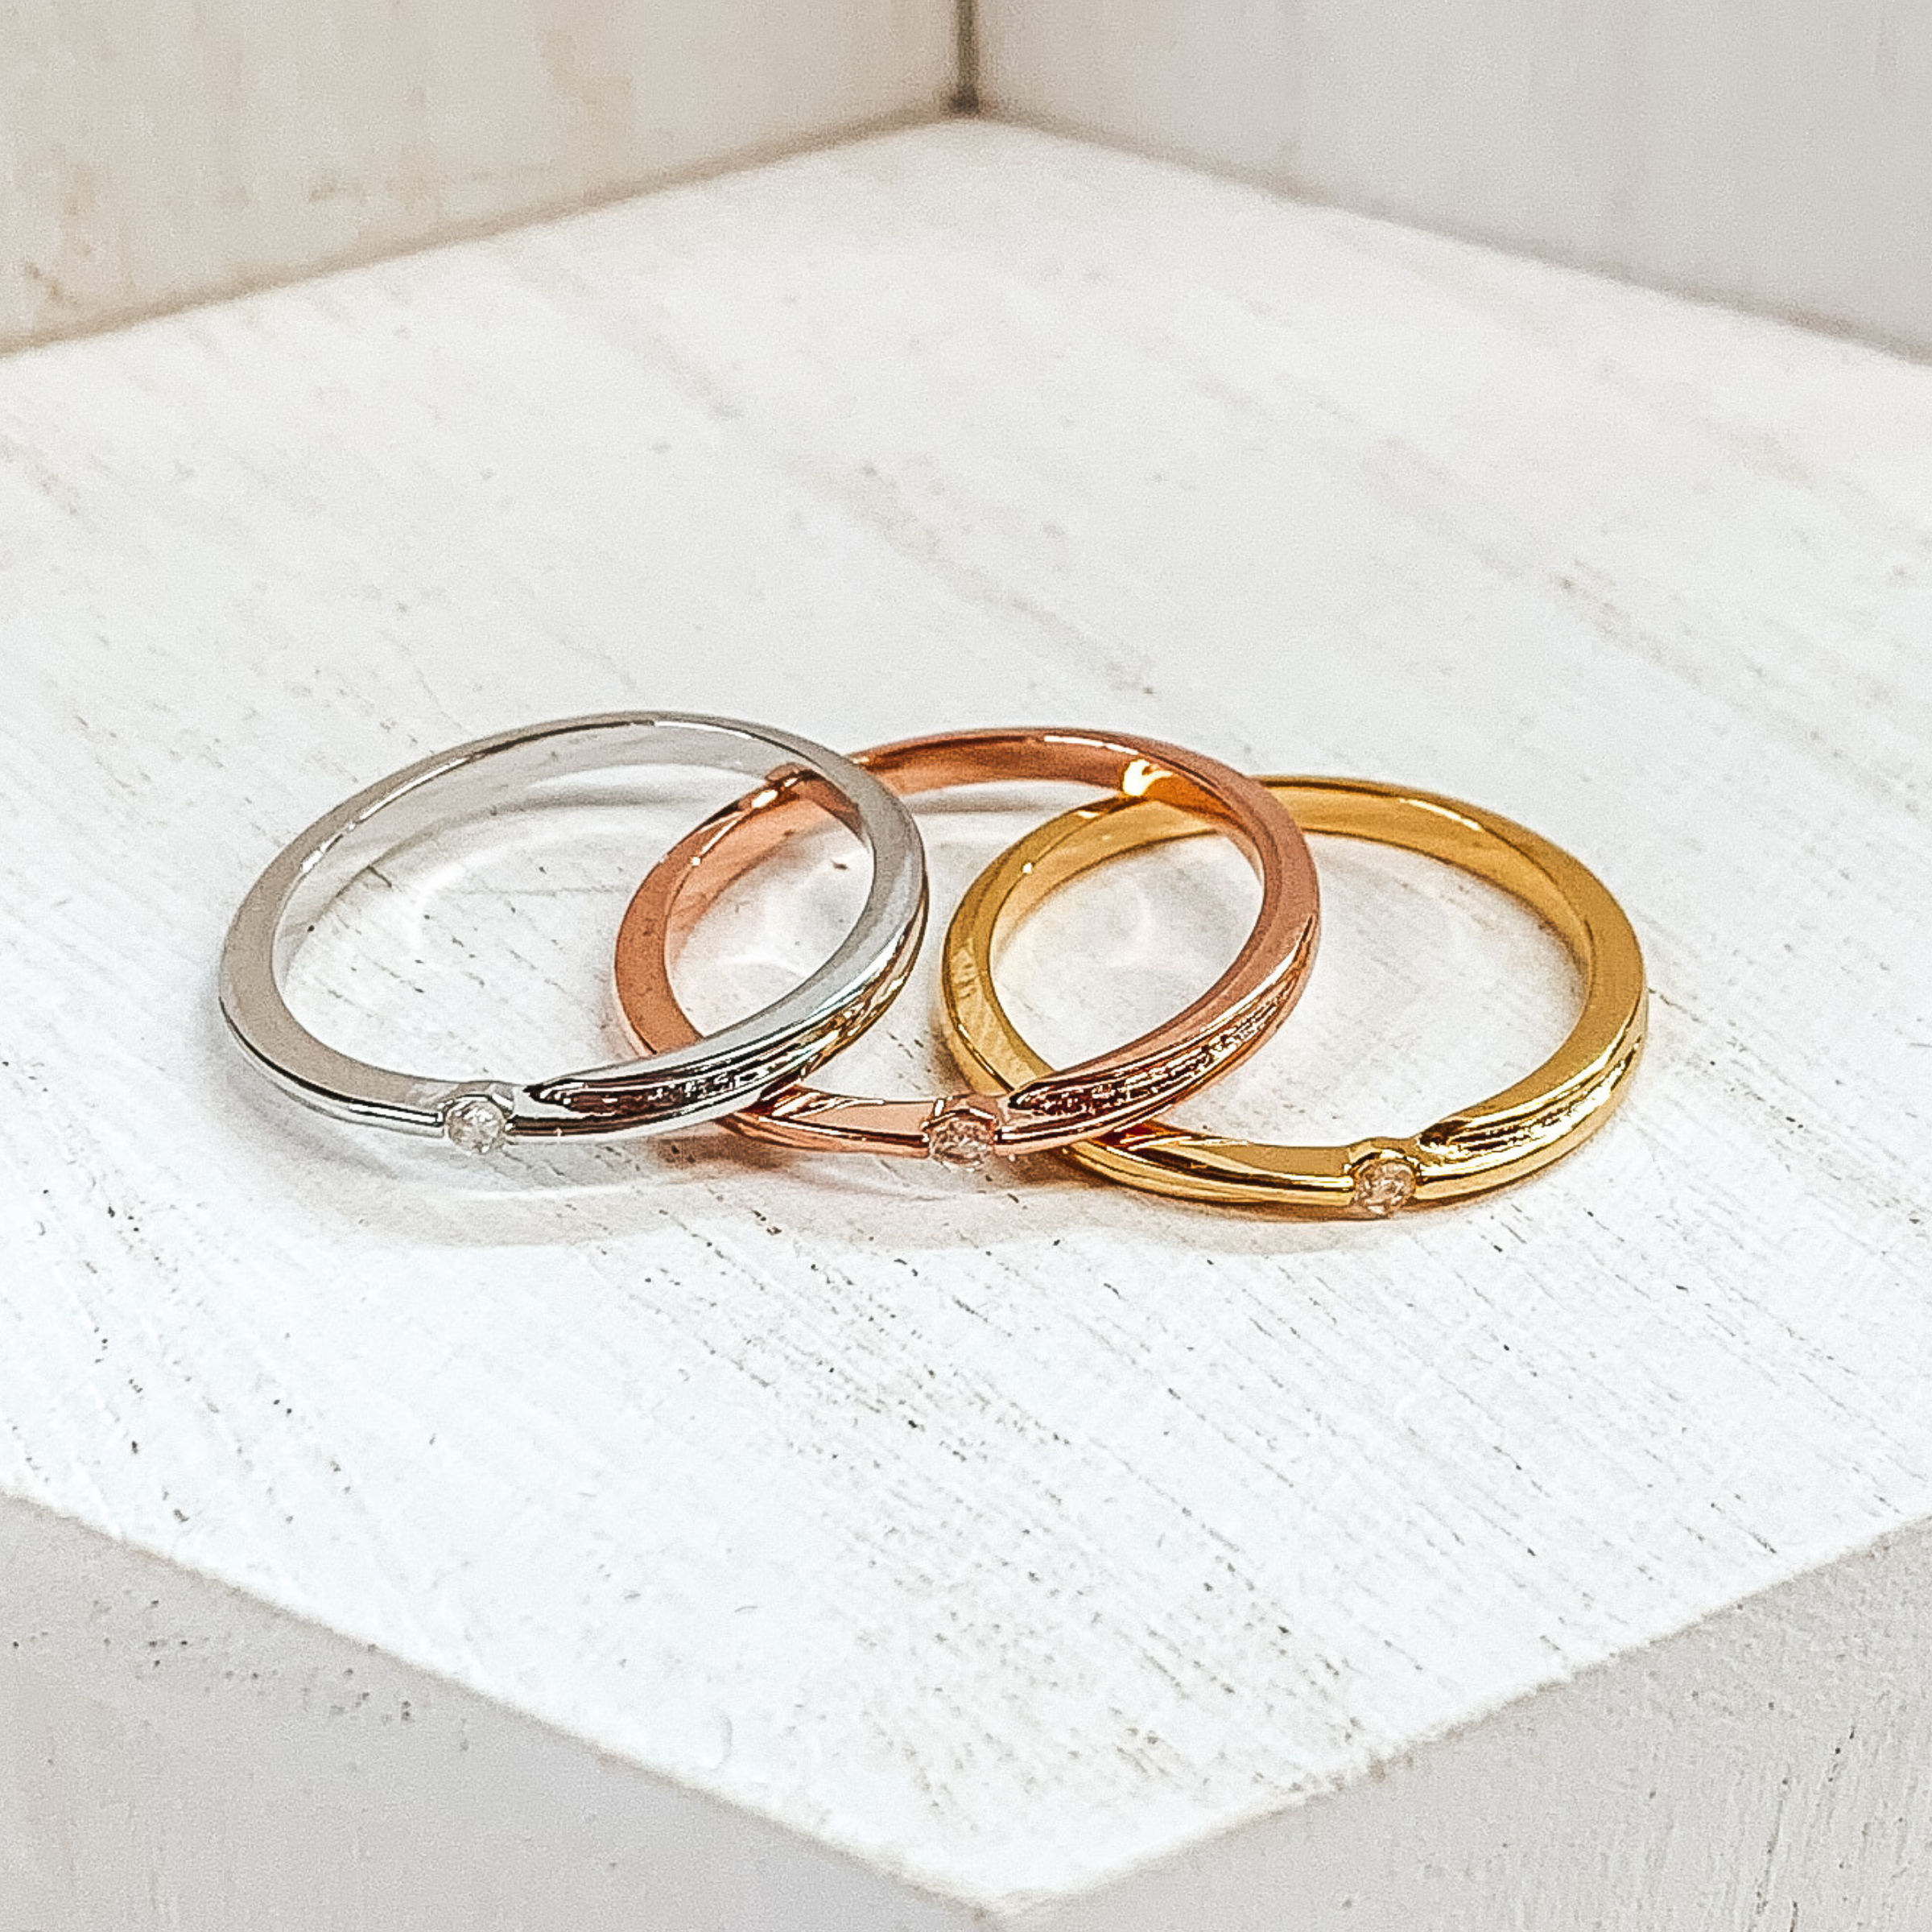 Set of three rings in silver, gold, and rose gold. Each ring has a center crystal in the center matching the color of the ring. These rings are pictured on a white background.